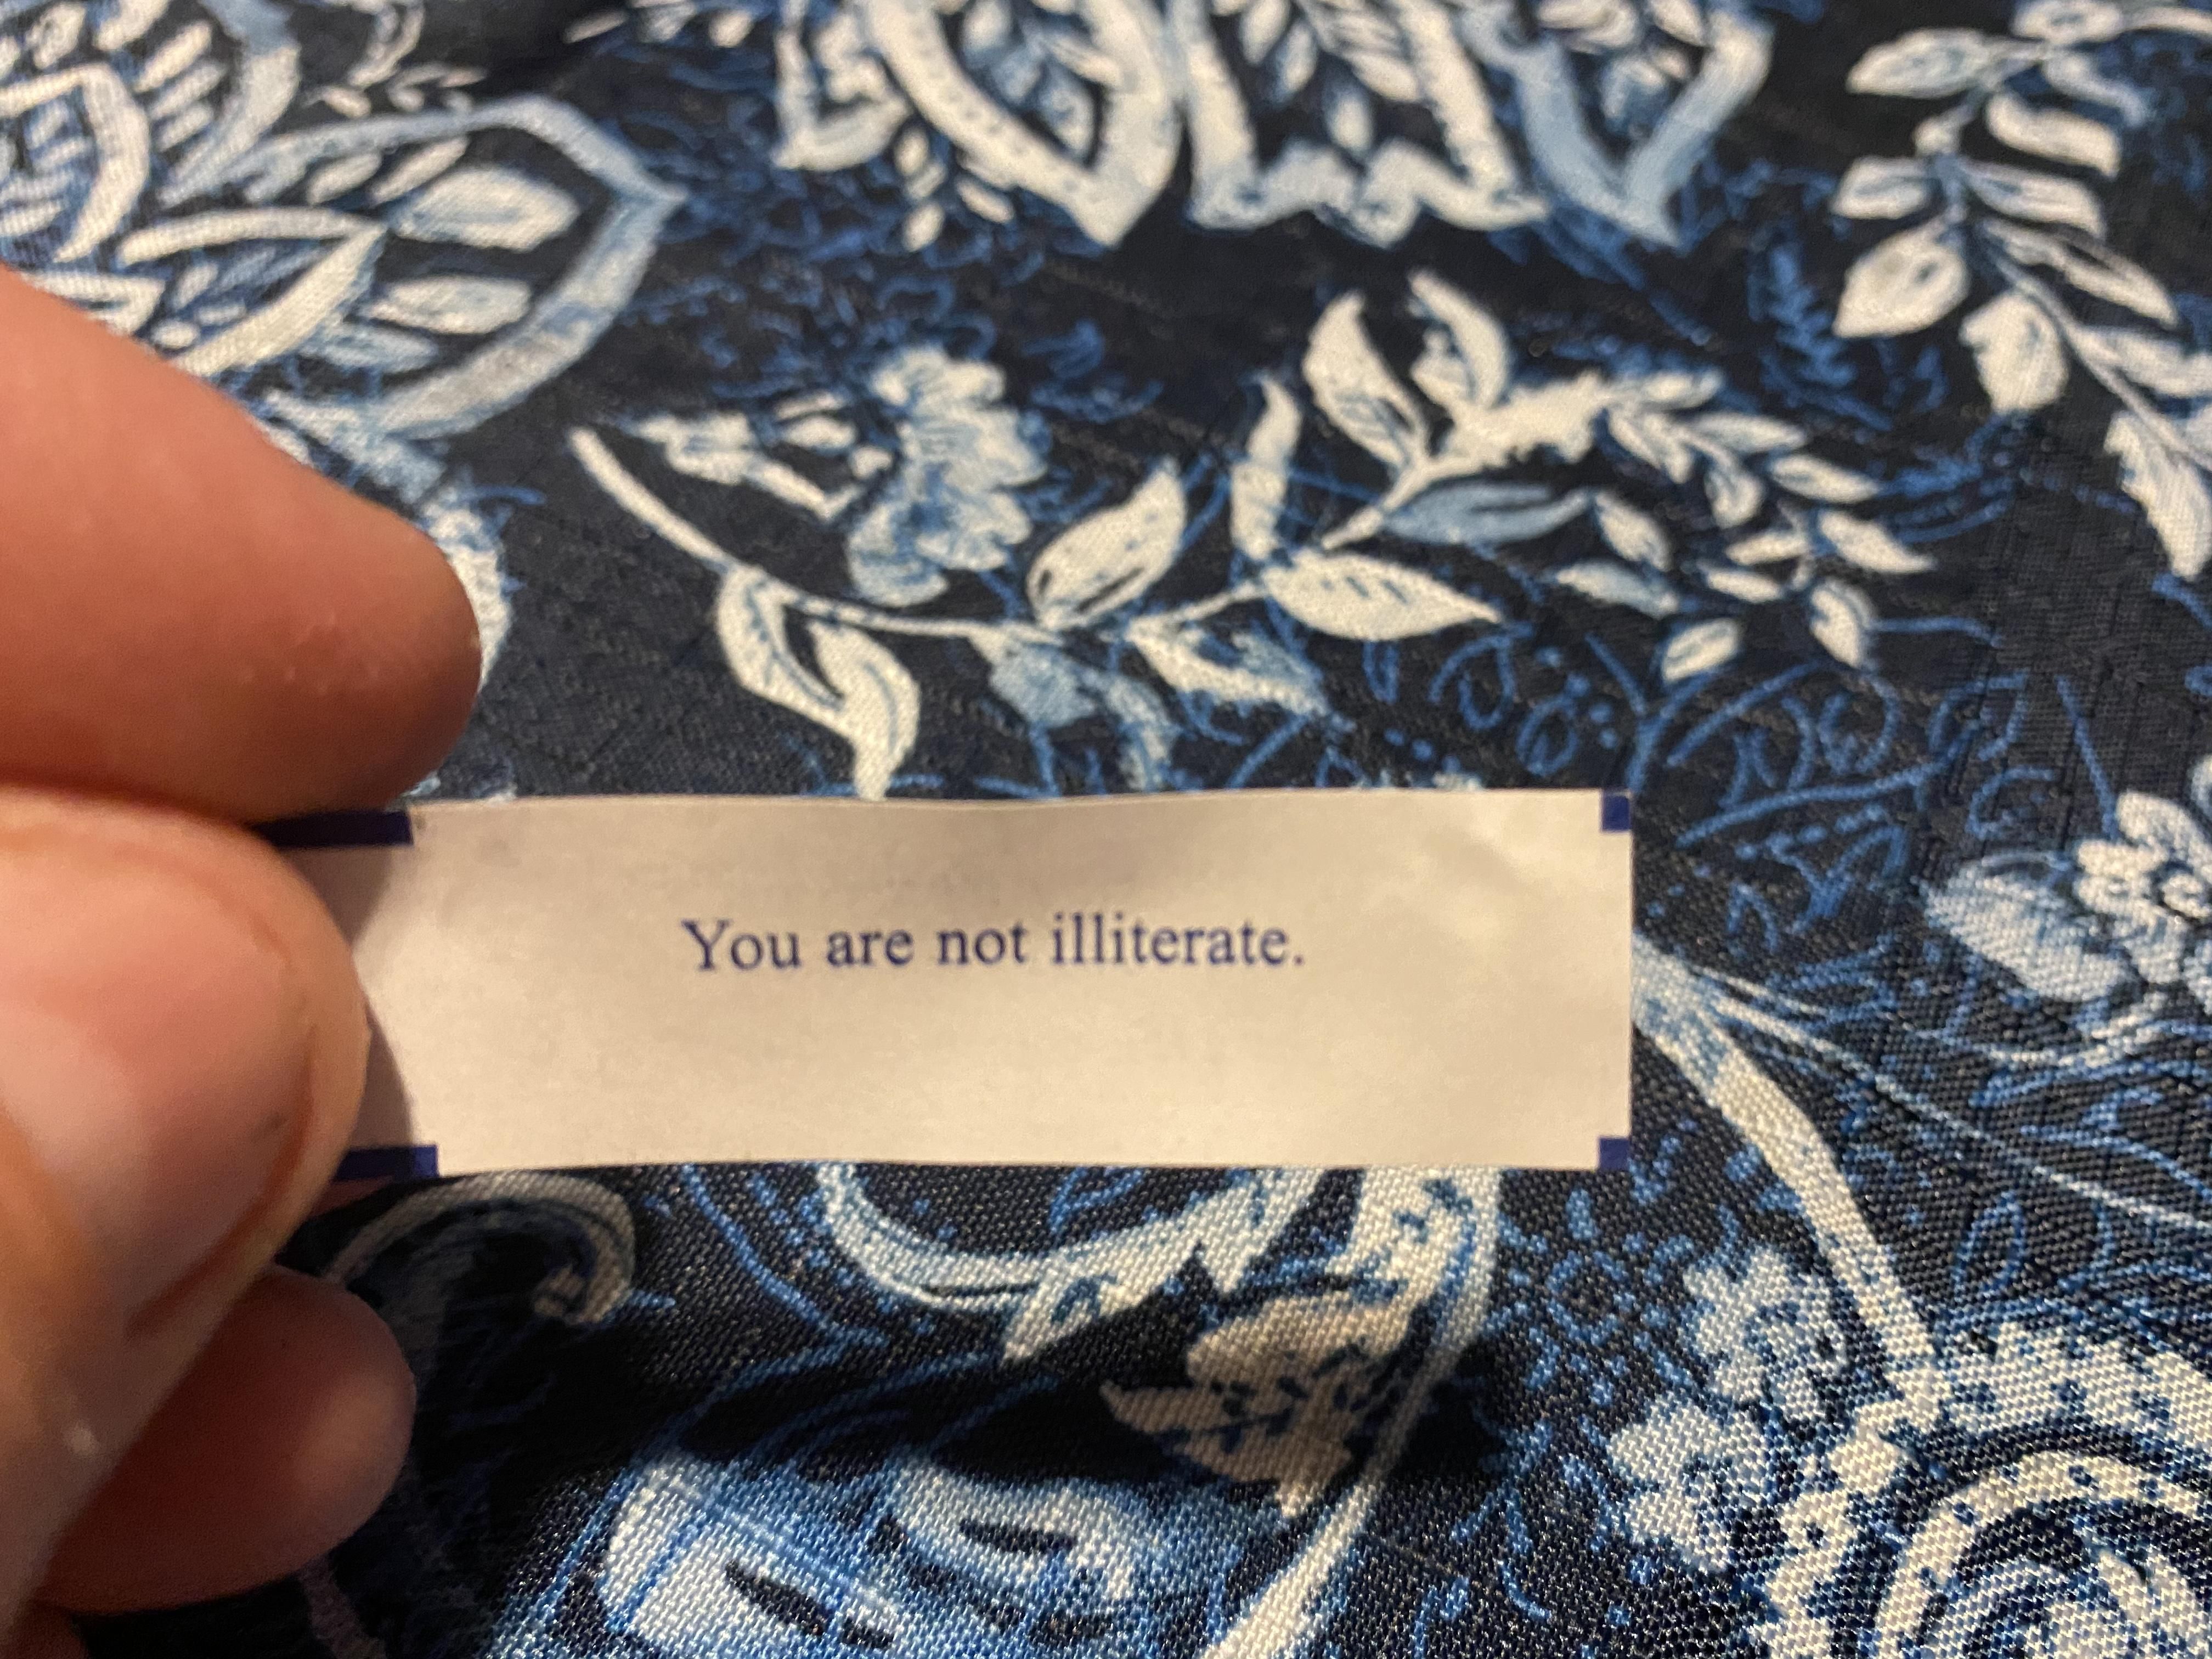 Oh, well that's a relief. Thanks fortune cookie.